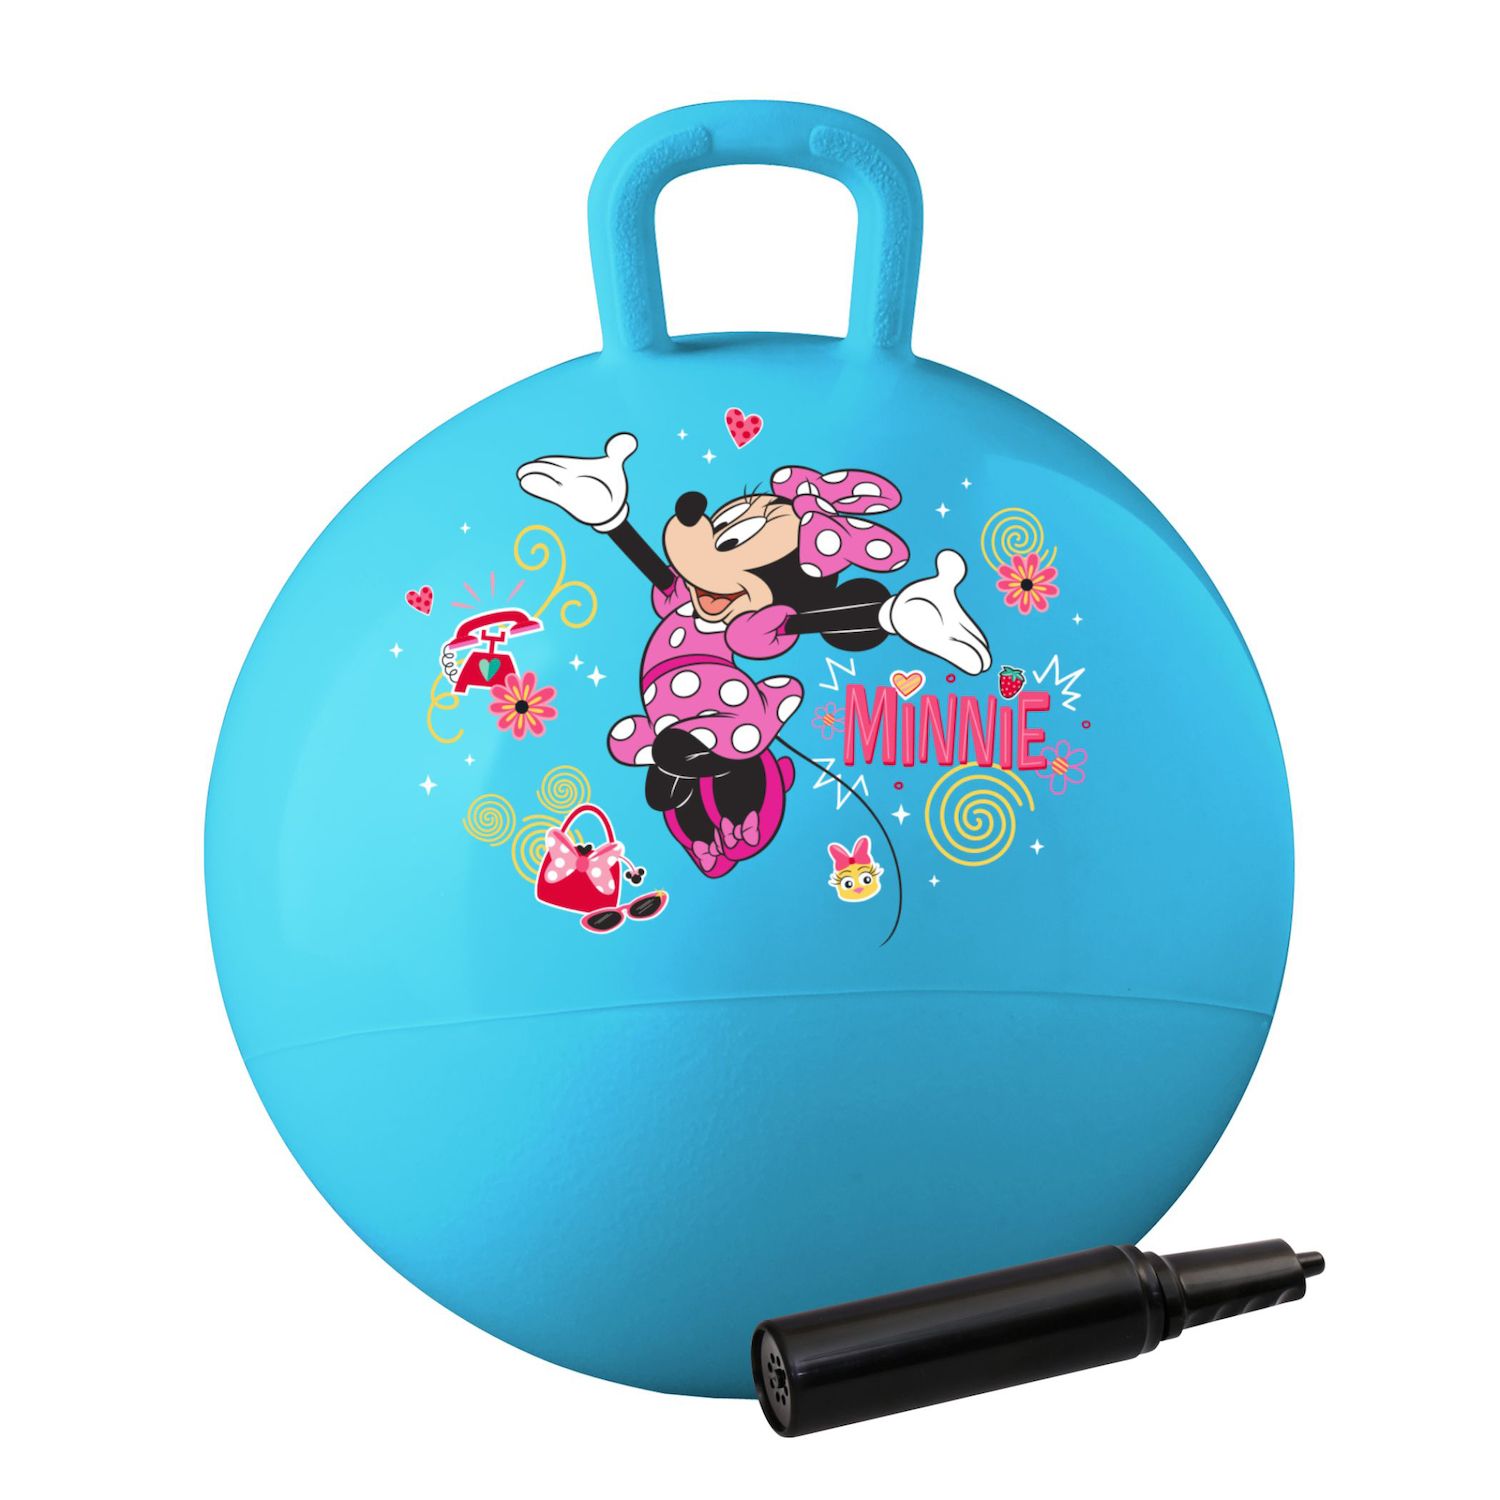 Image for Hedstrom Disney's Minnie Mouse 18" Hopper with Pump at Kohl's.